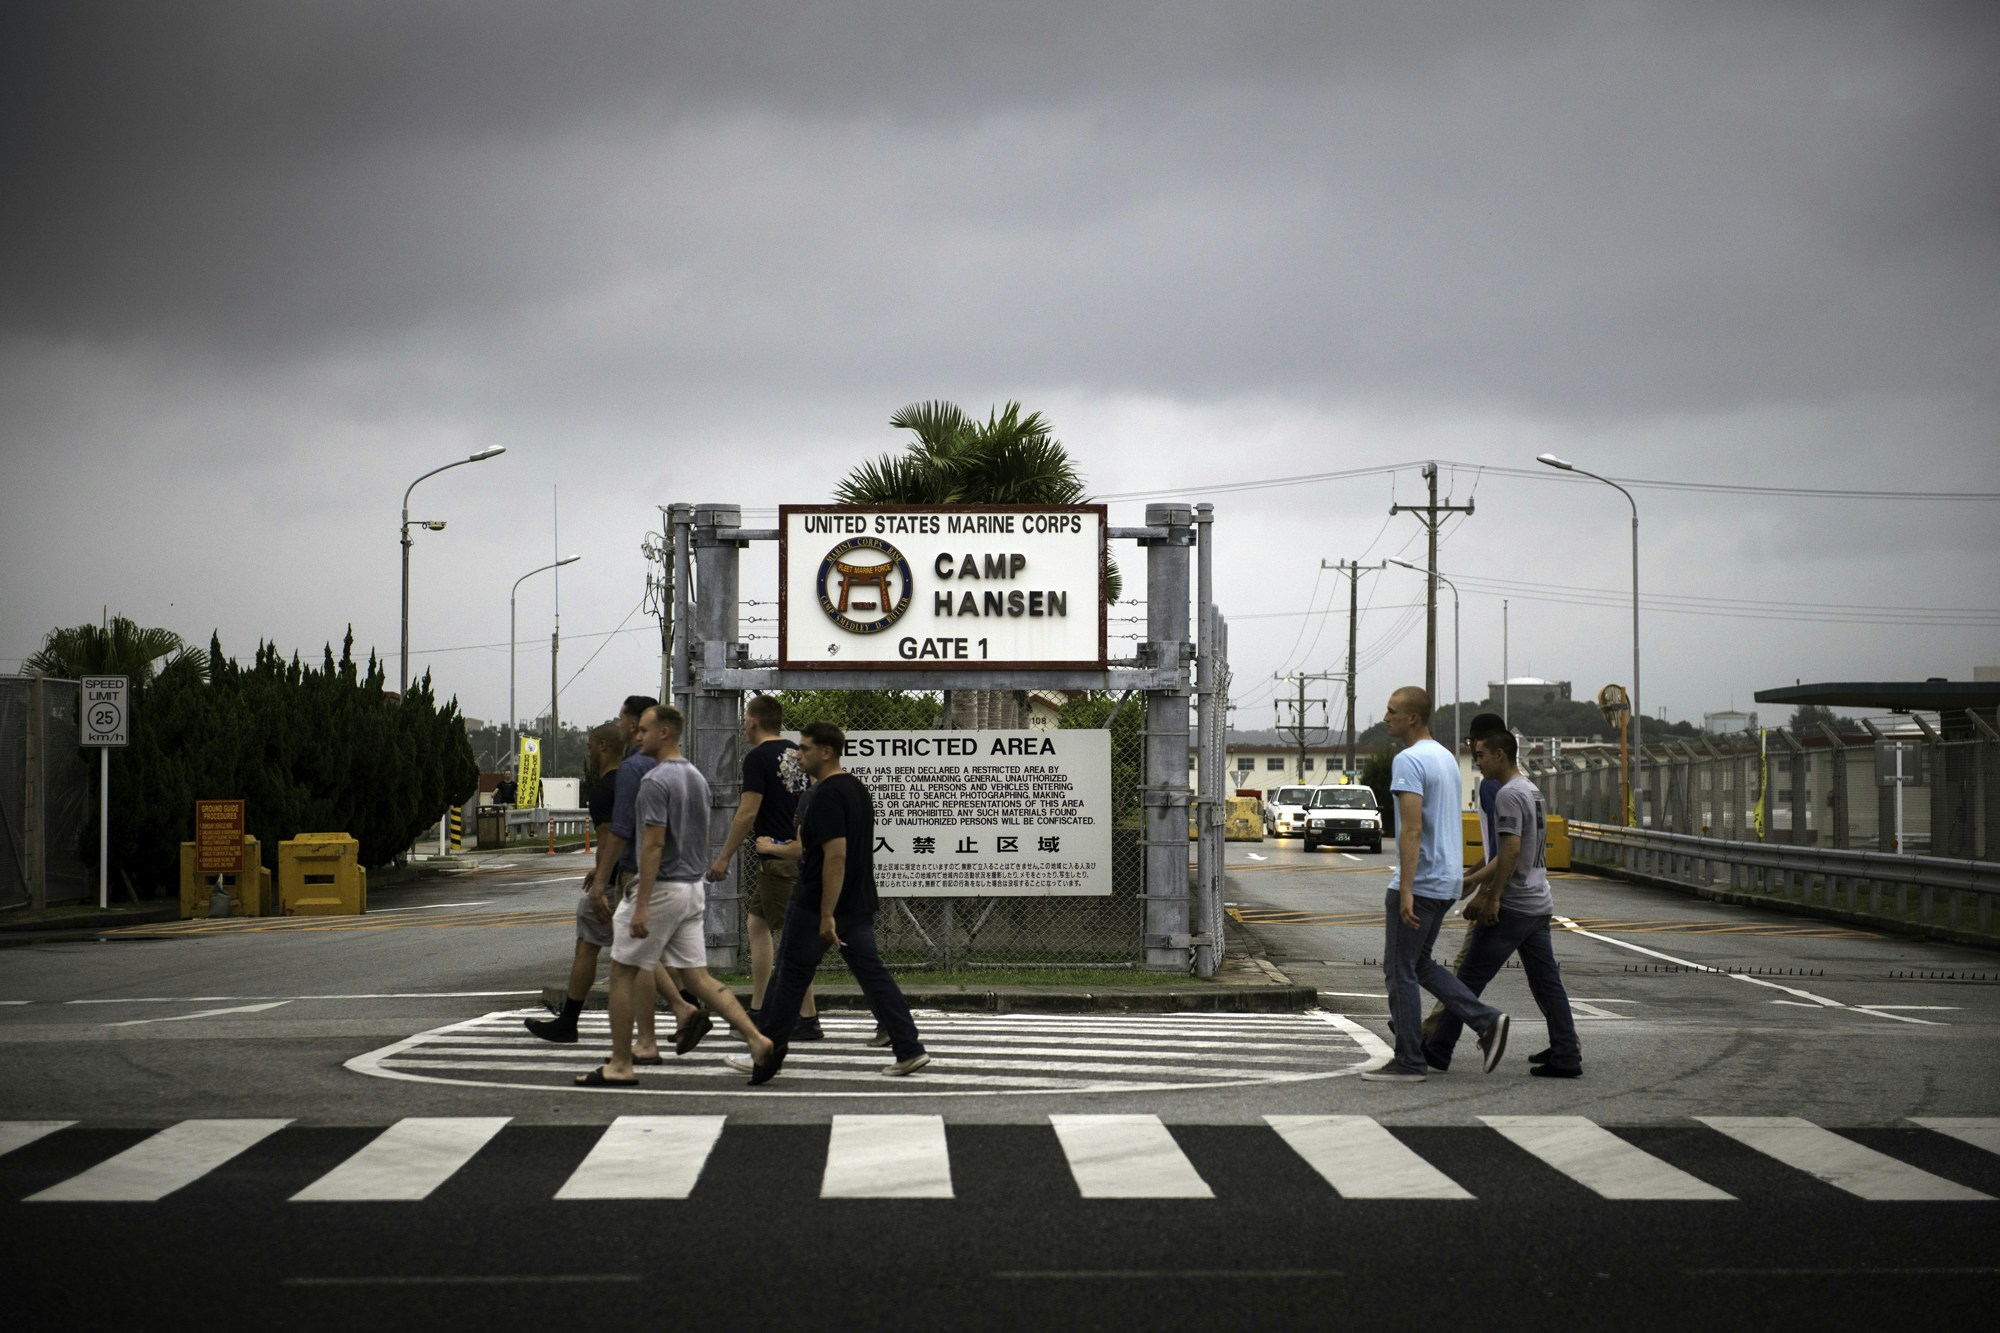 US Military were seen walking in front of the U.S. Marine Corps' Camp Hansen gate during off duty on Friday, June 15, 2018 in Ginoza, Okinawa prefecture, Japan. (Photo: Richard Atrero de Guzman /Nur Photo ) (Photo by Richard Atrero de Guzman/NurPhoto via Getty Images)